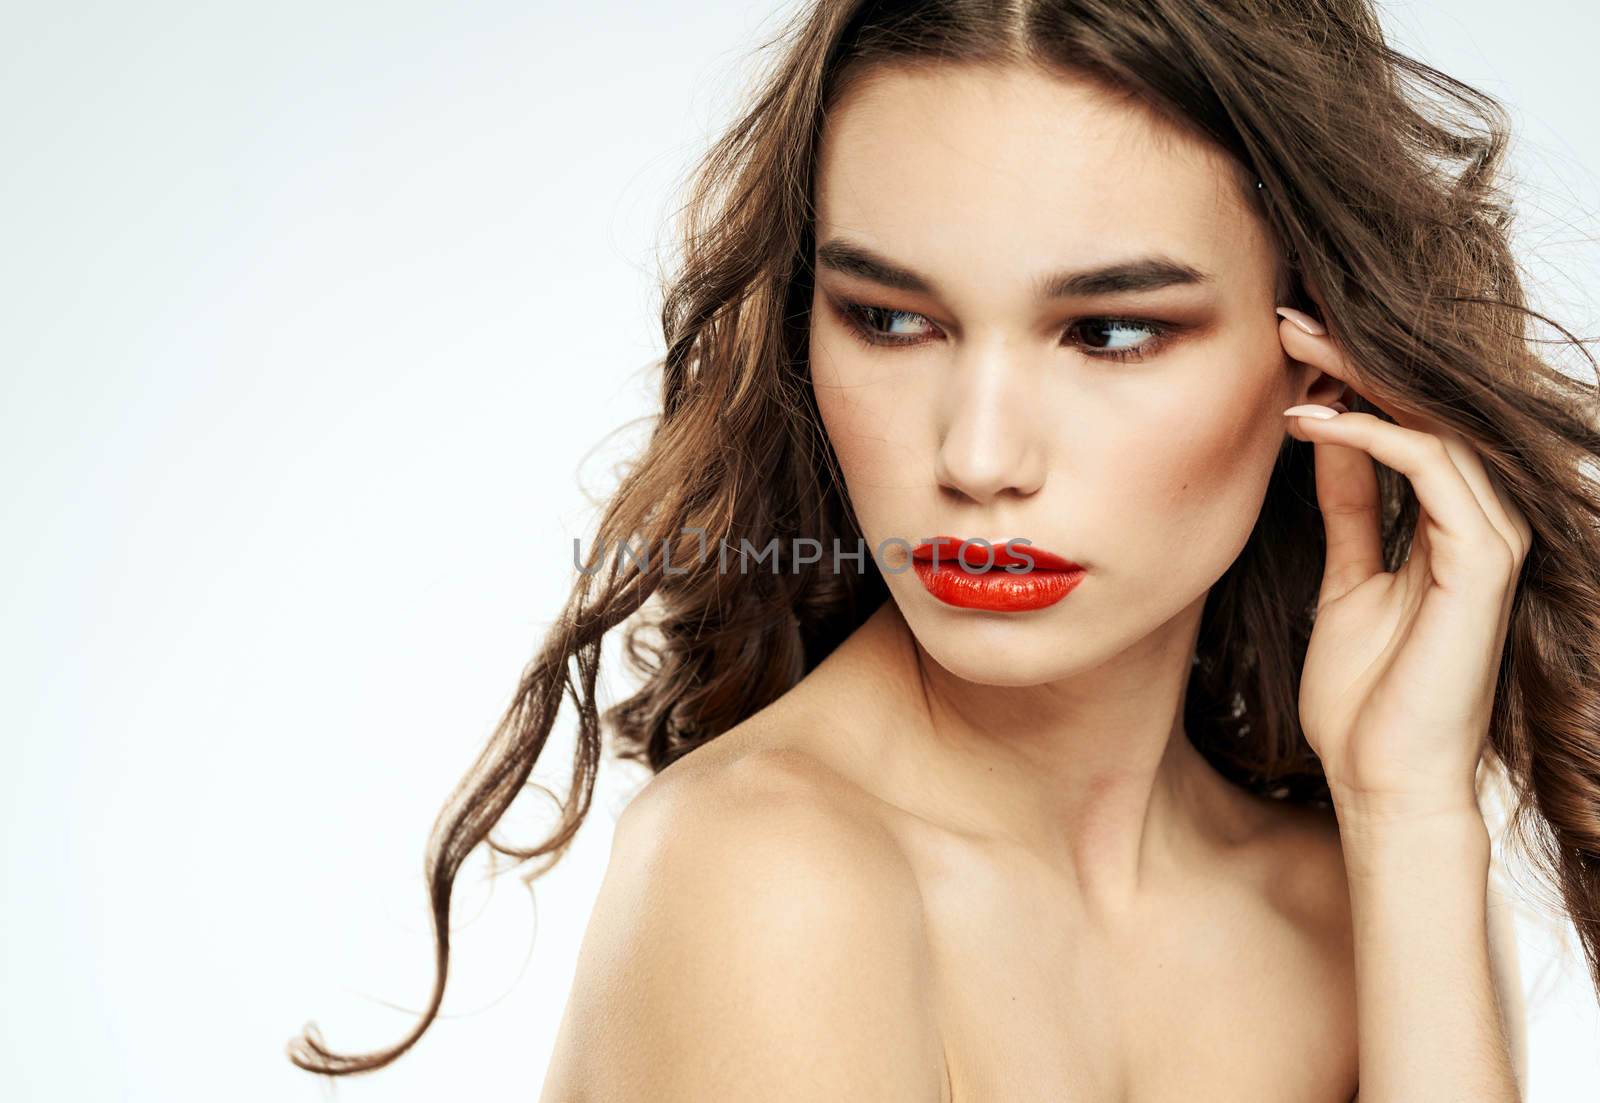 Beautiful lady red lips curly hair makeup portrait. High quality photo